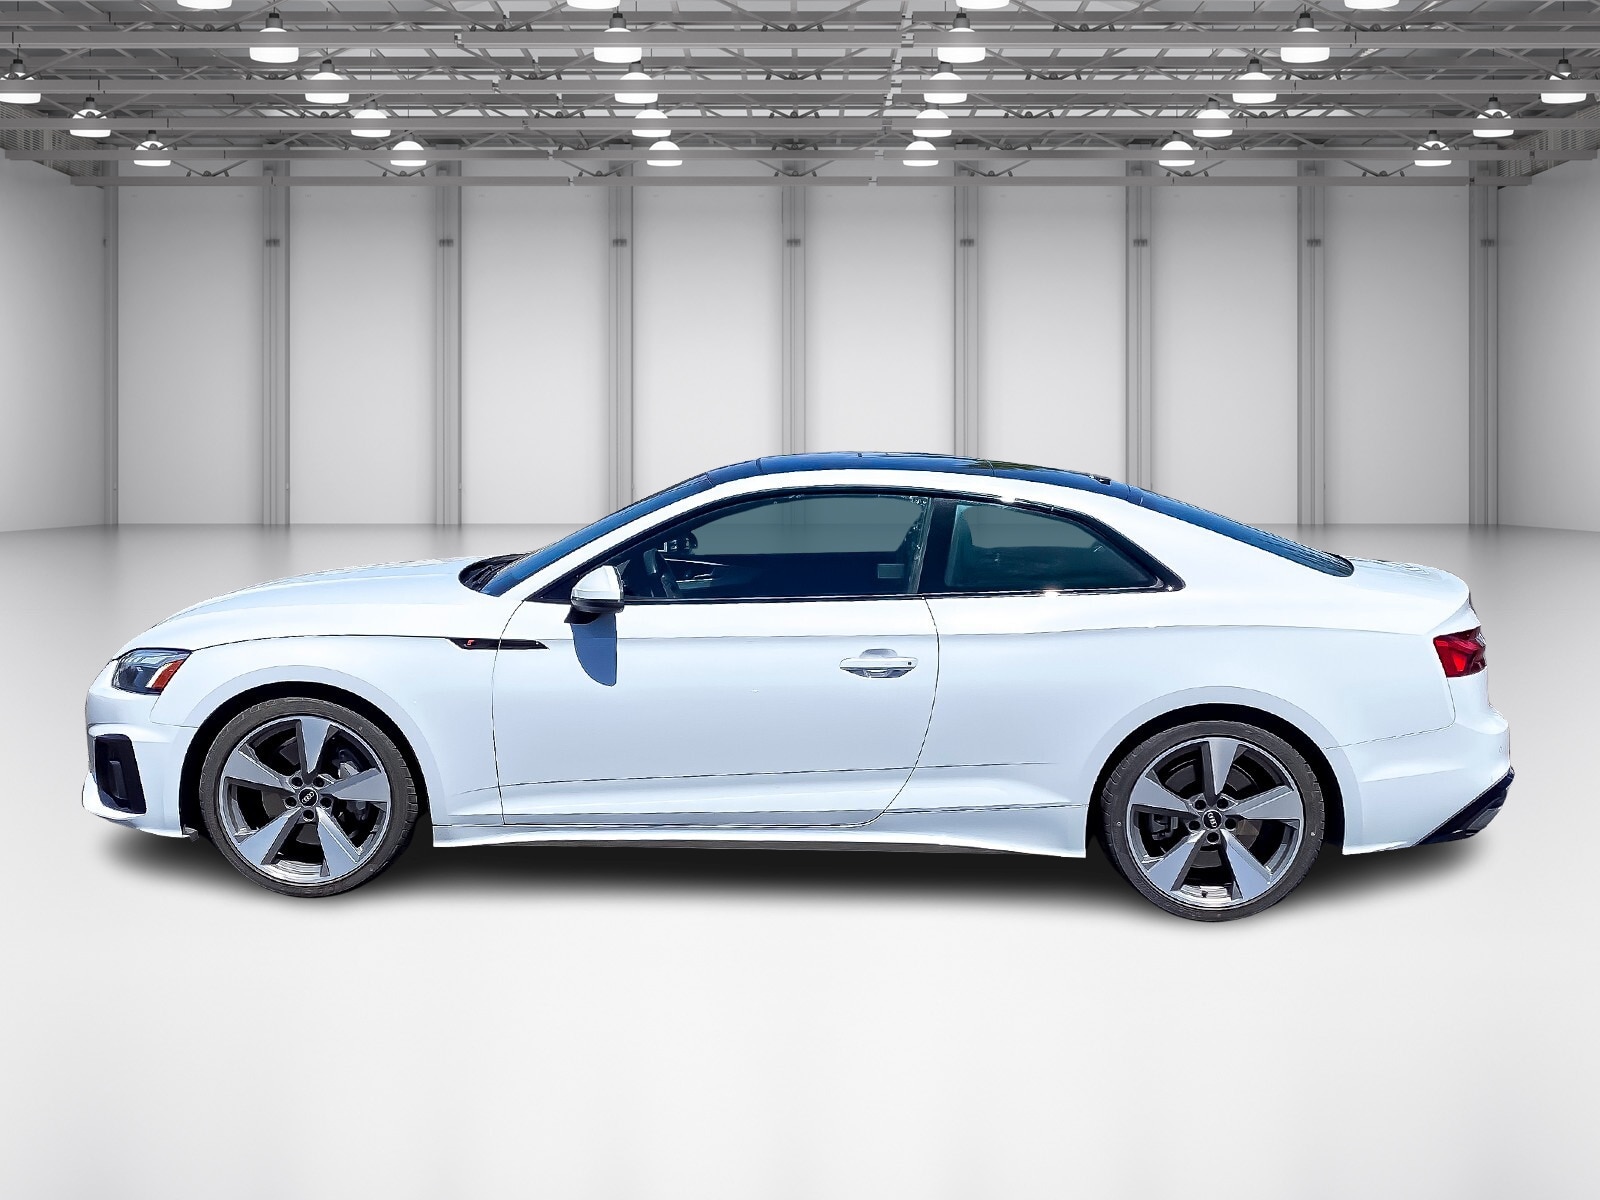 Used 2021 Audi A5 Coupe Premium Plus with VIN WAUTAAF59MA061590 for sale in Reno, NV